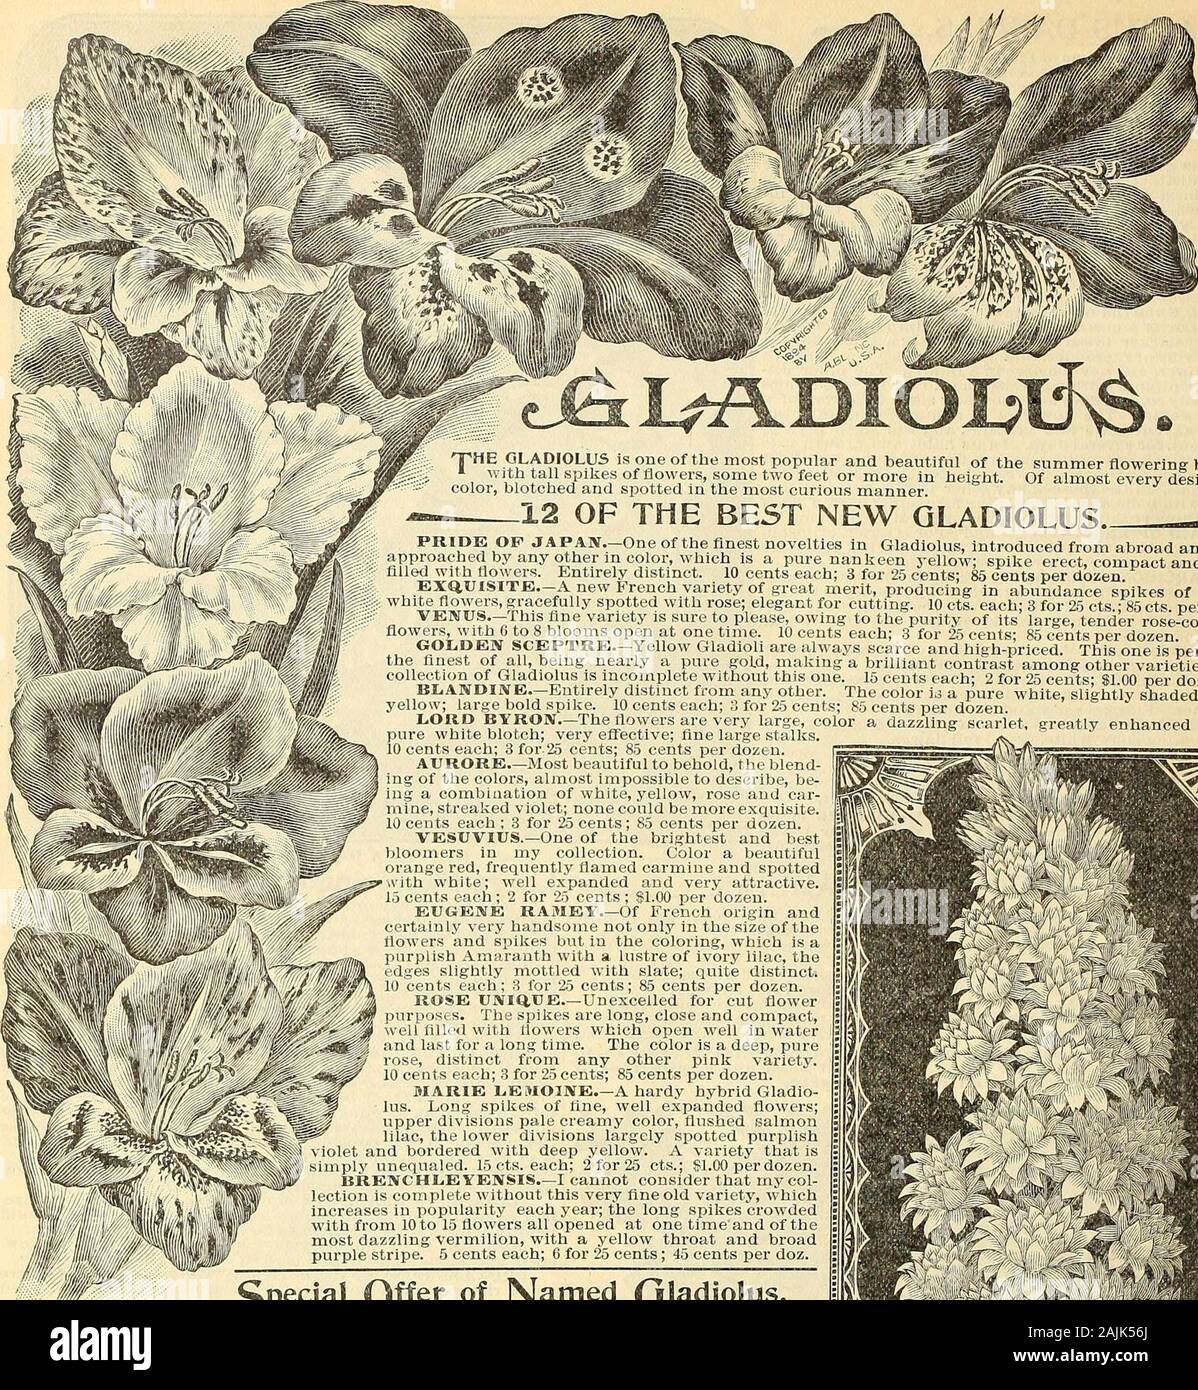 Maule's seed catalogue : 1896 . uted&gt;over various portions of the petals, flower of perfect form. PAUL OF PAISLEY.—Rich, light lilac purple with a velvetyhue, flower perfect in form and a constant bloomer. DIANA.—.Satiny white, softly blending to shell pink, uniquely tipped with reddish pink, handsome full flower. Any of the above I^arge Flowering or Show Dahlias, iO cents each; 3 for .id cents; Si.50 per dozen. Or I « lit send one strong root of each of the Ii varieties fur only St.50, postpaid. FOR ONLY $3.00, POSTPAID. I will send one strong- root of each of the 27 Dahliasdescribed above Stock Photo